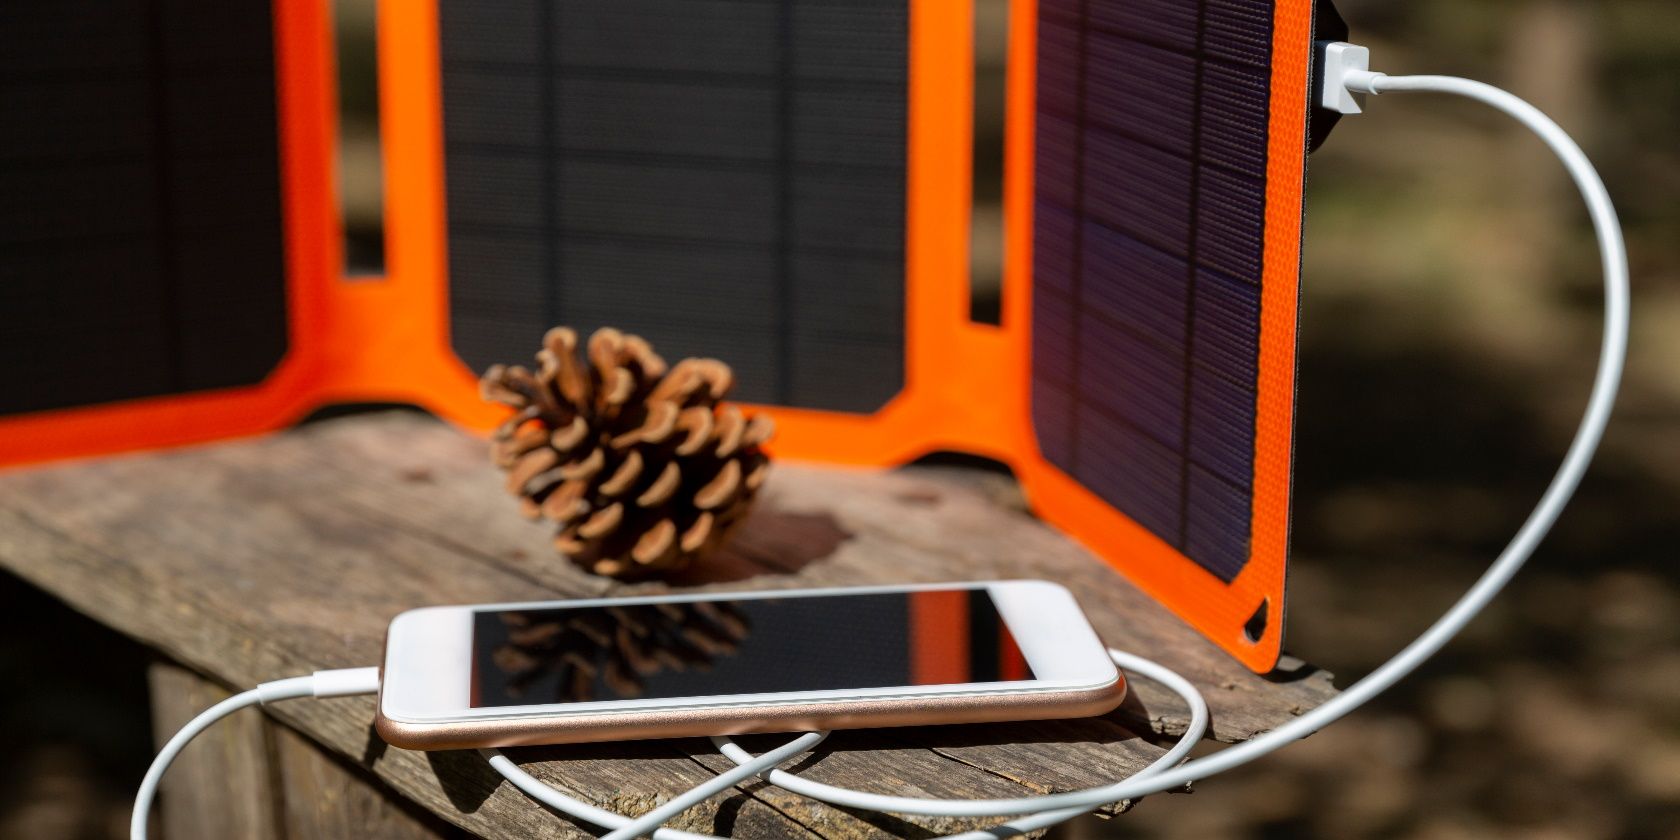 Solar-Powered Music Devices